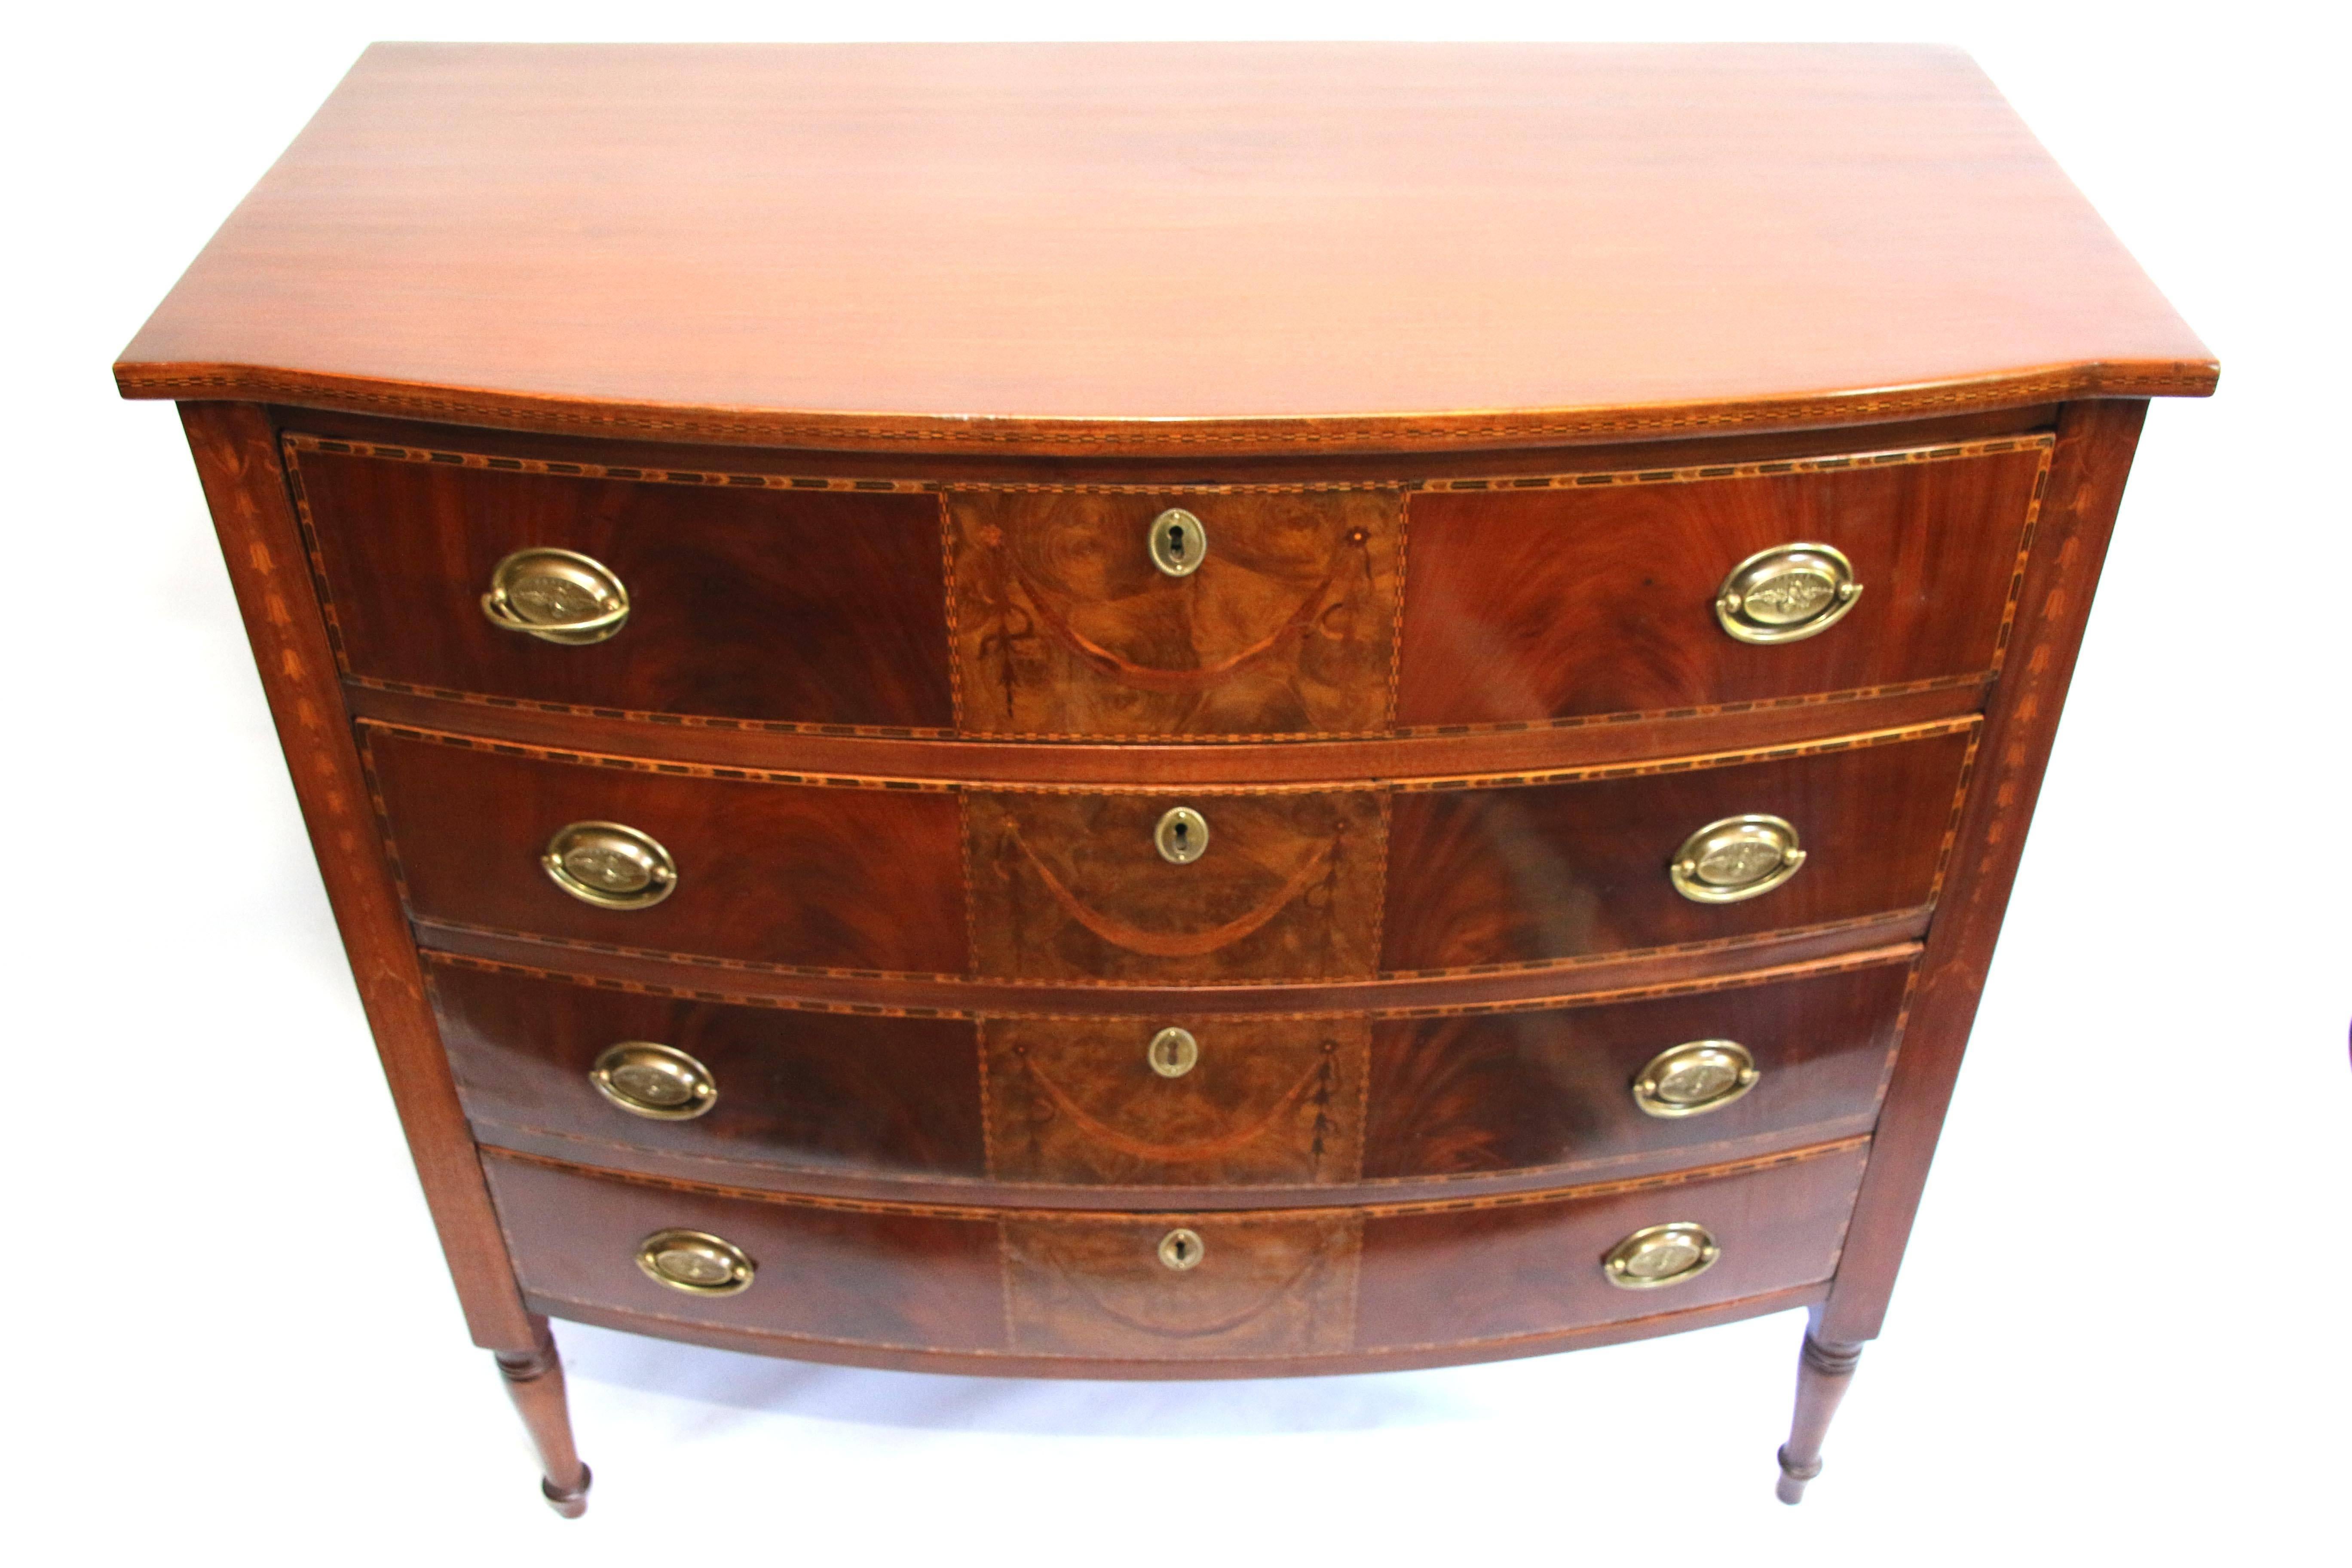 Fine Sheraton four-drawer inlaid bowfront chest having a shaped top with checkered inlaid banding over four full drawers, each having fronts centring on inlaid panels with swag rosette and bellflower inlay. Flanked by burled wood panels. Framed with